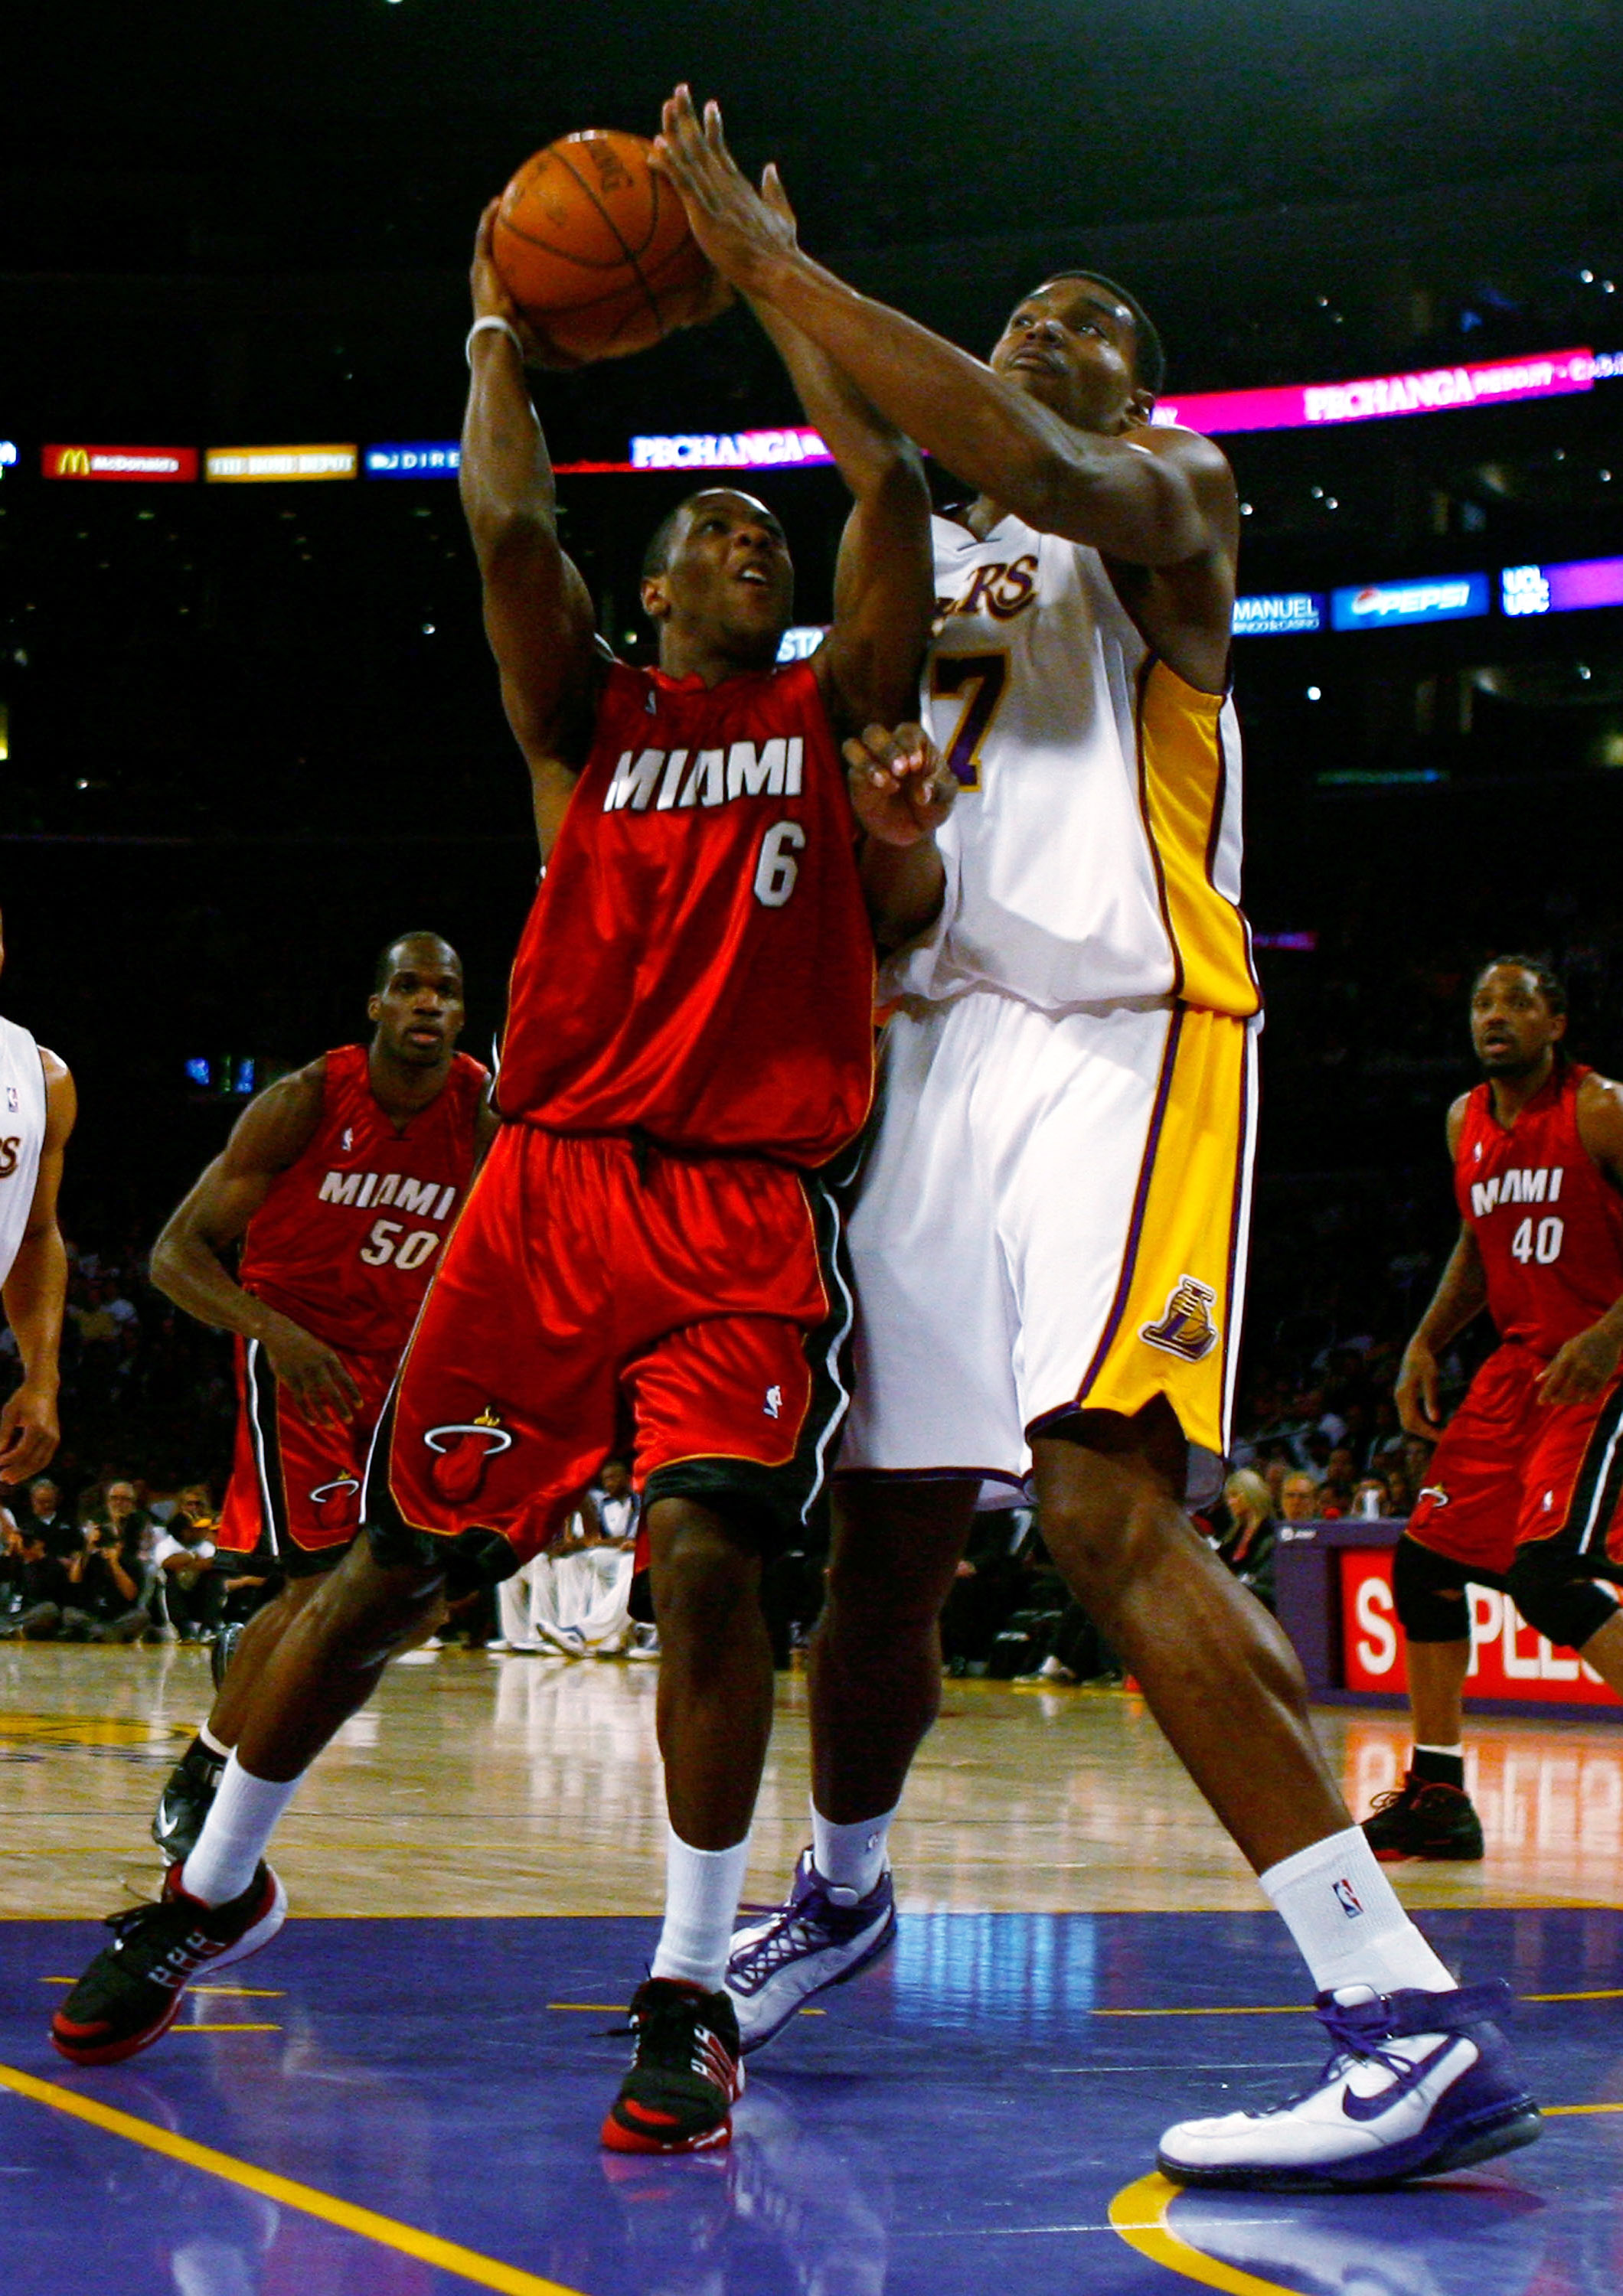 LOS ANGELES, CA - JANUARY 11:  Mario Chalmers #6 of the Miami Heat is defended by Andrew Bynum #17 of the Los Angeles Lakers during the first half at Staples Center on January 11, 2009 in Los Angeles, California. NOTE TO USER: User expressly acknowledges